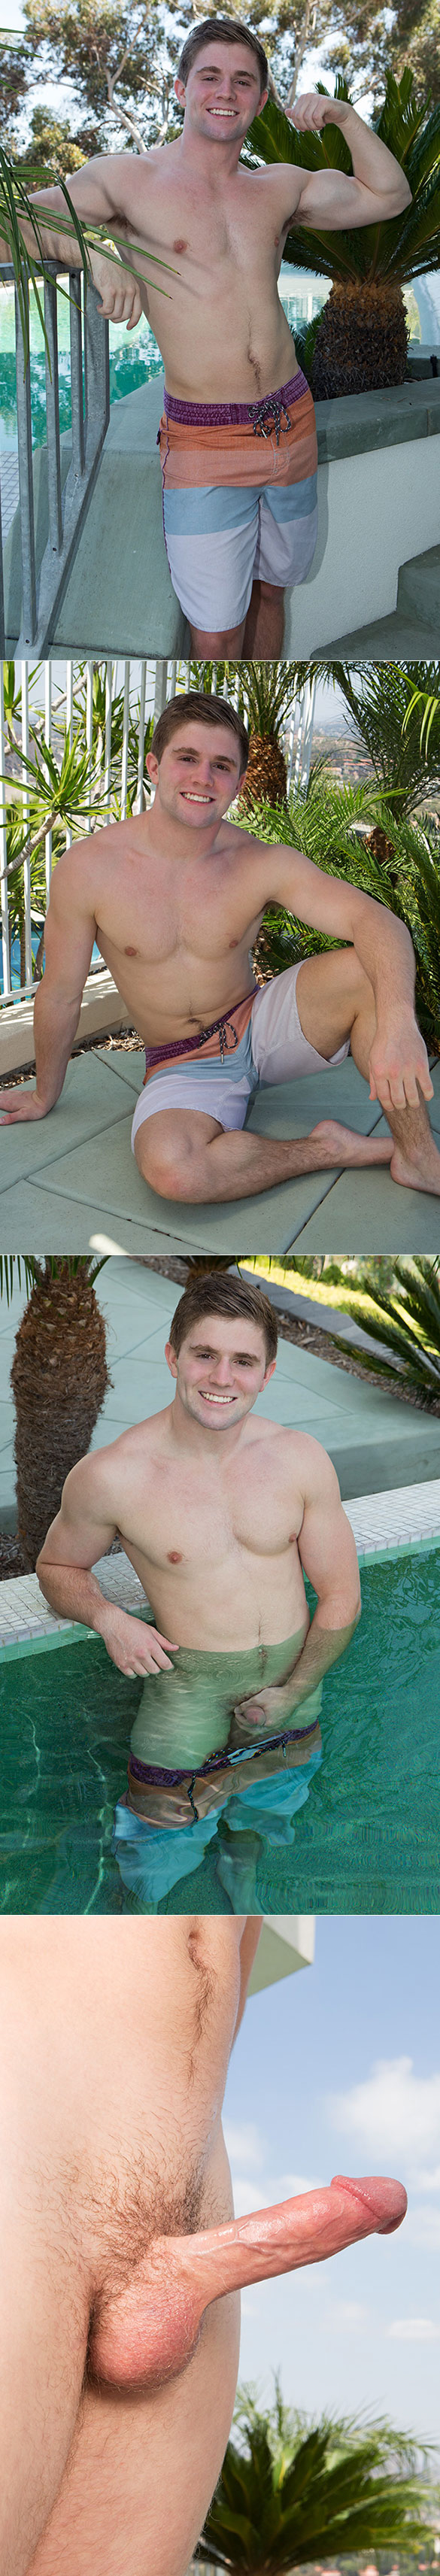 Sean Cody: Theo rubs one out